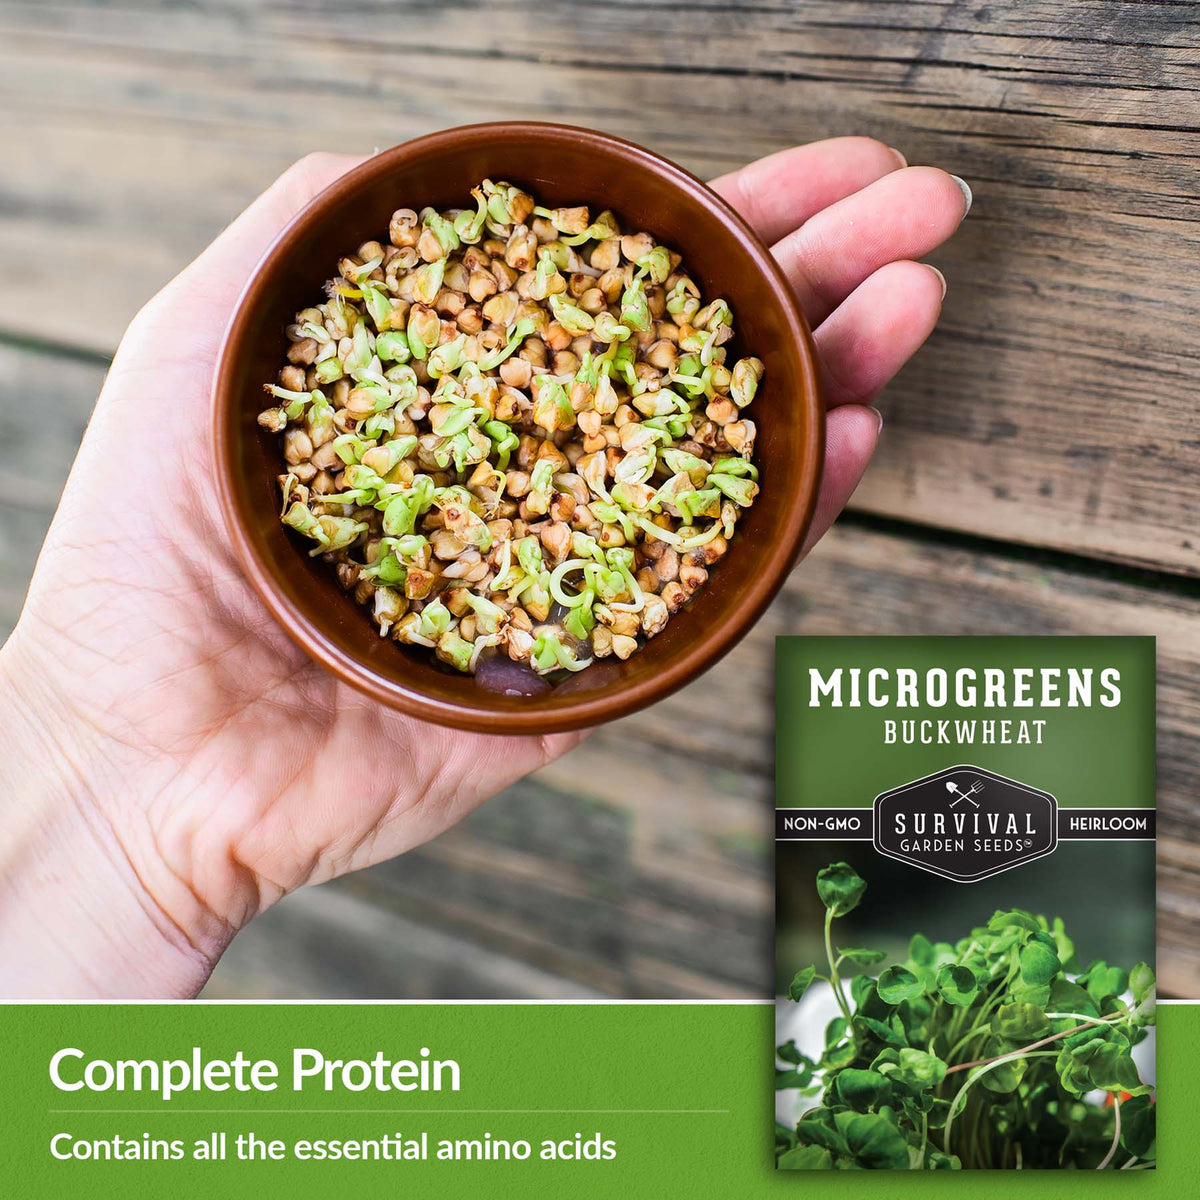 Buckwheat microgreens contain complete protein